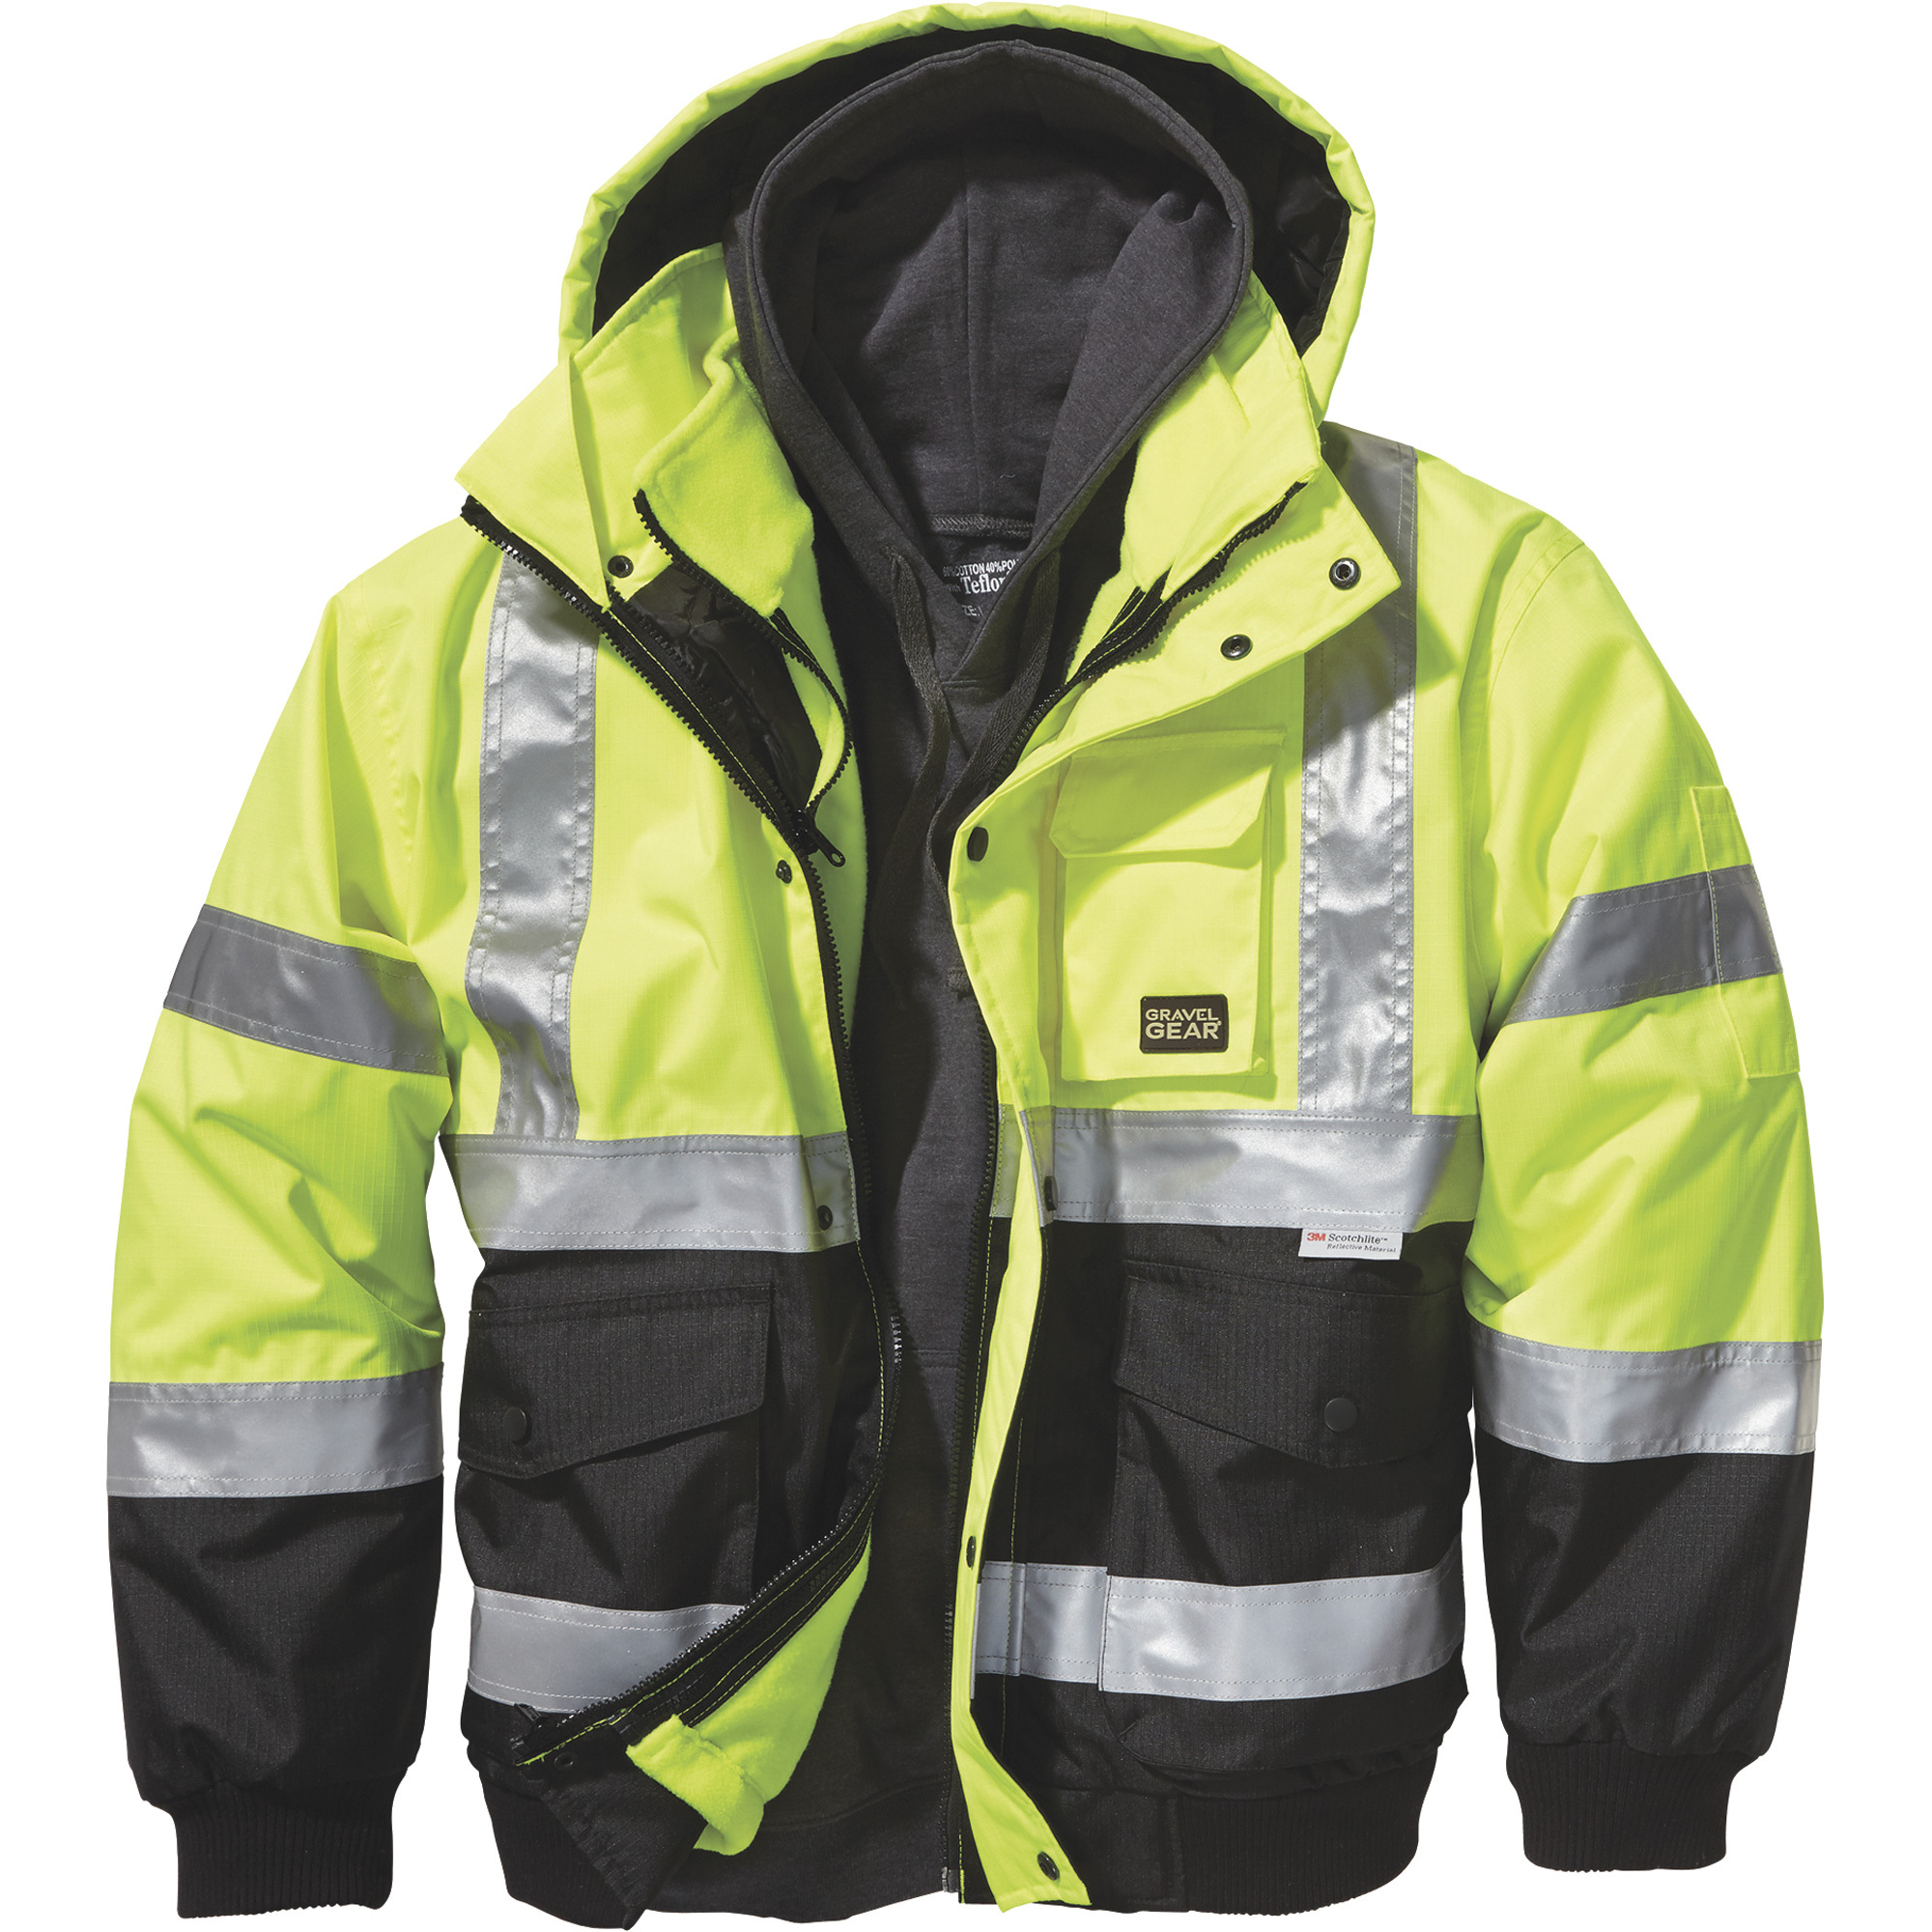 Gravel Gear Men's High Visibility 3-in-1 Bomber Jacket with Reflective Material â Lime, 4XL